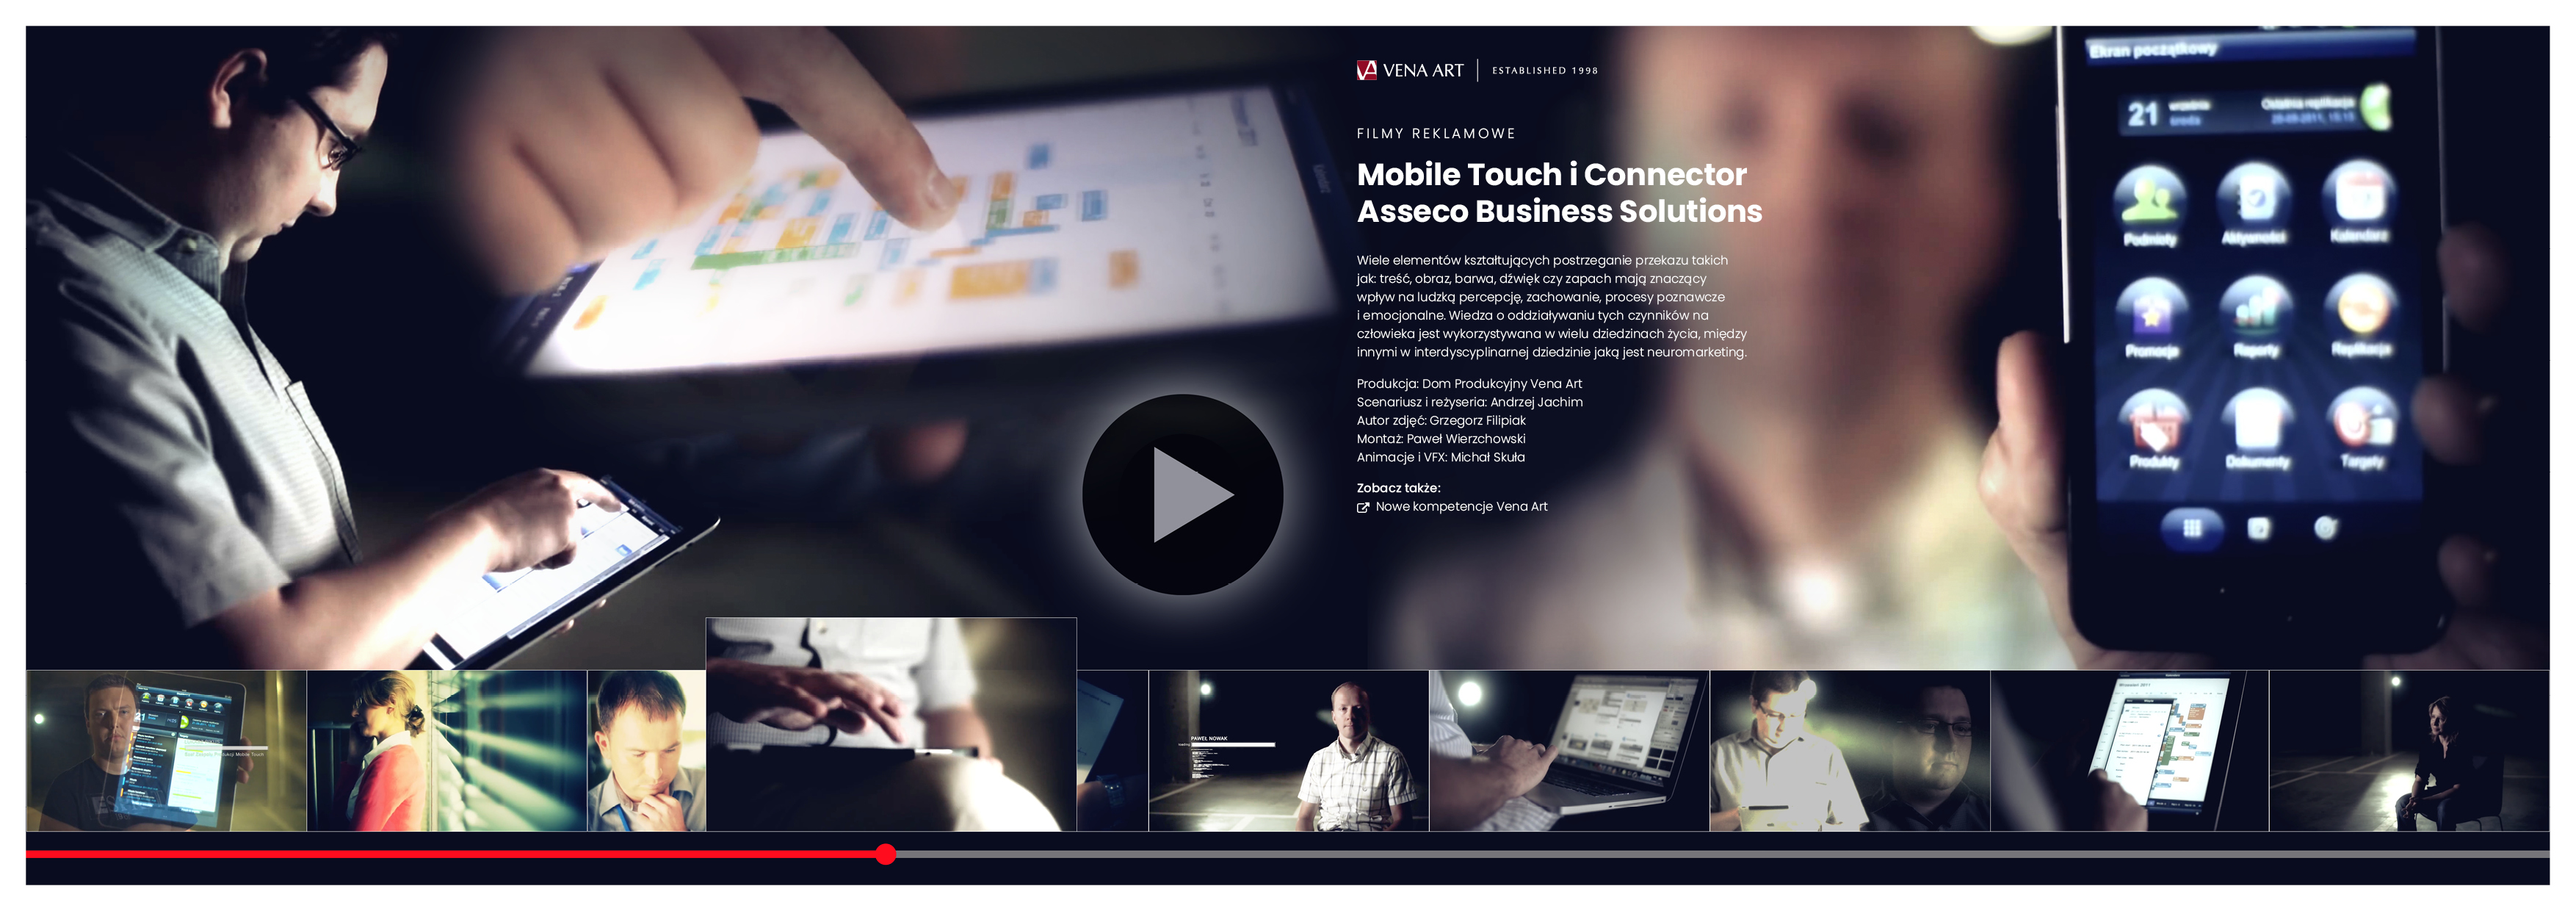 Mobile Touch i Connector — Asseco Business Solutions